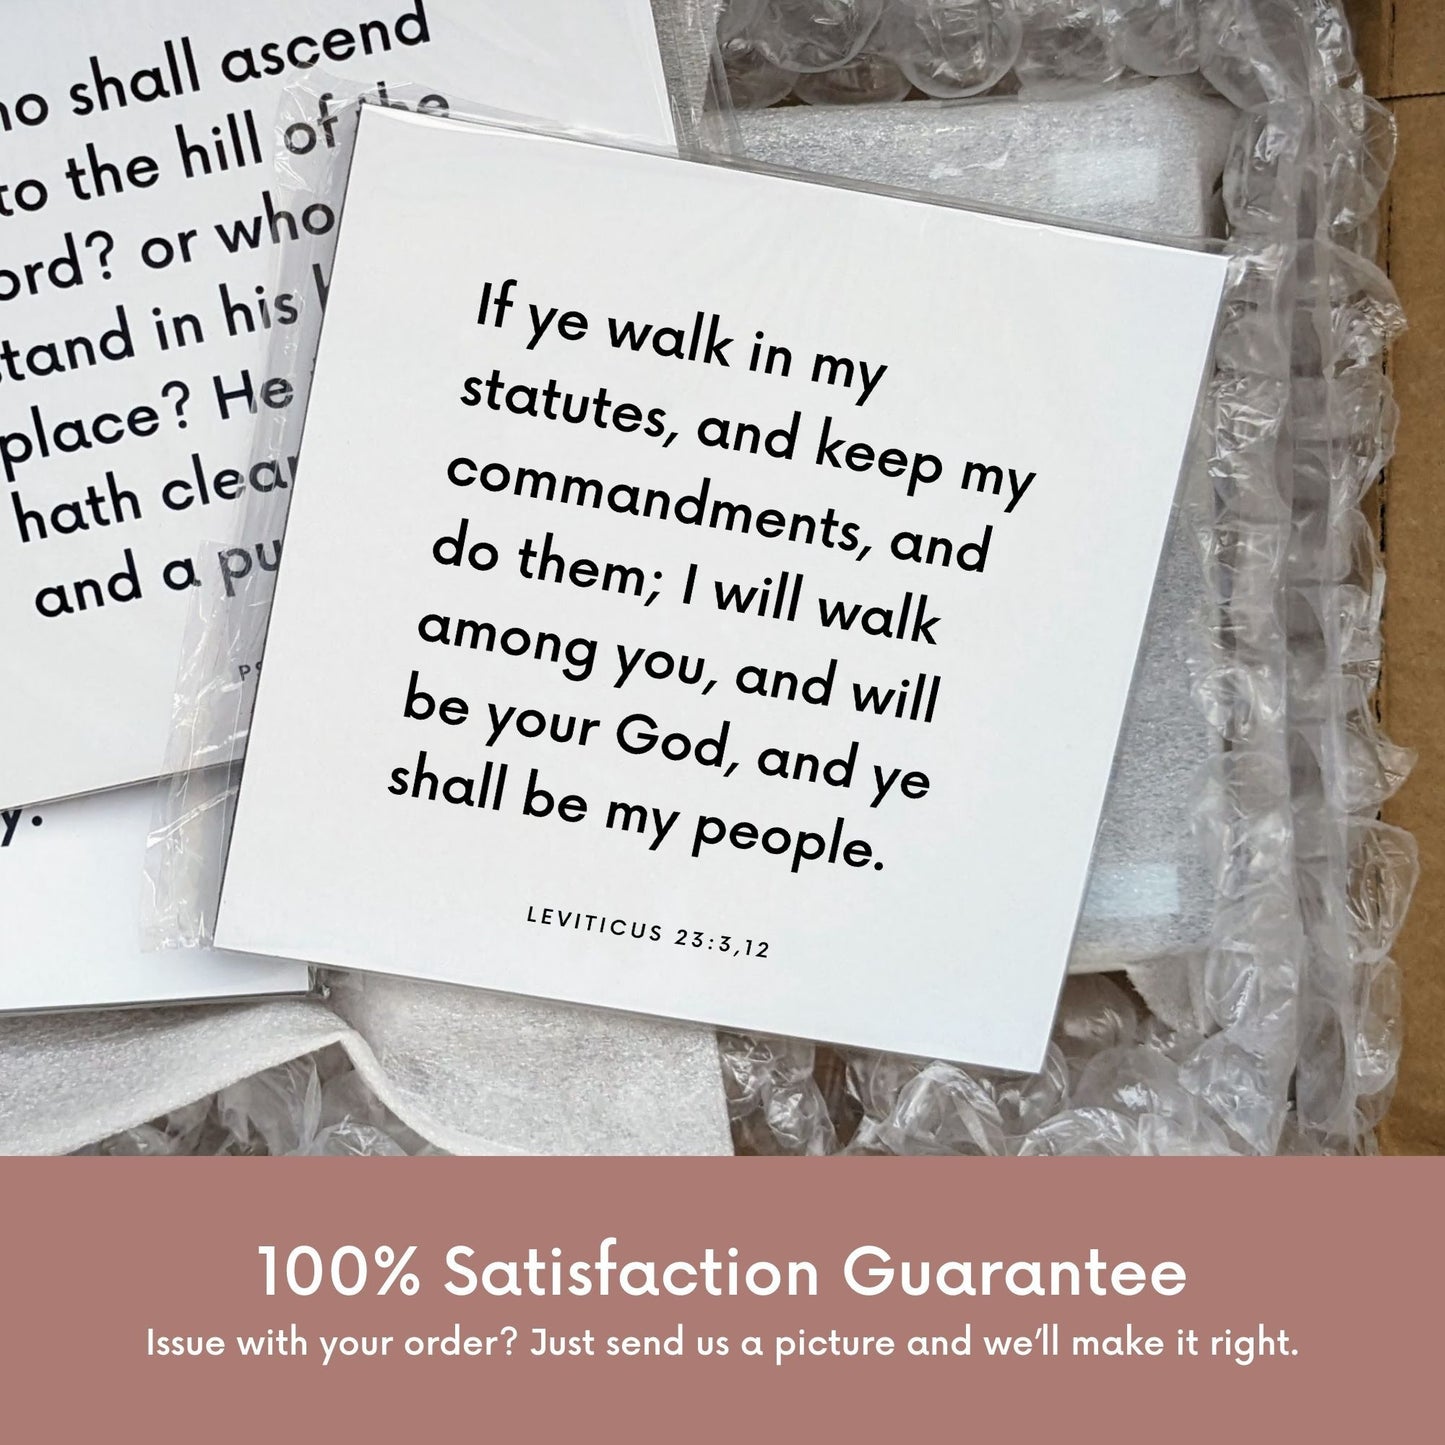 Shipping materials for scripture tile of Leviticus 23:3,12 - "I will walk among you, and will be your God"